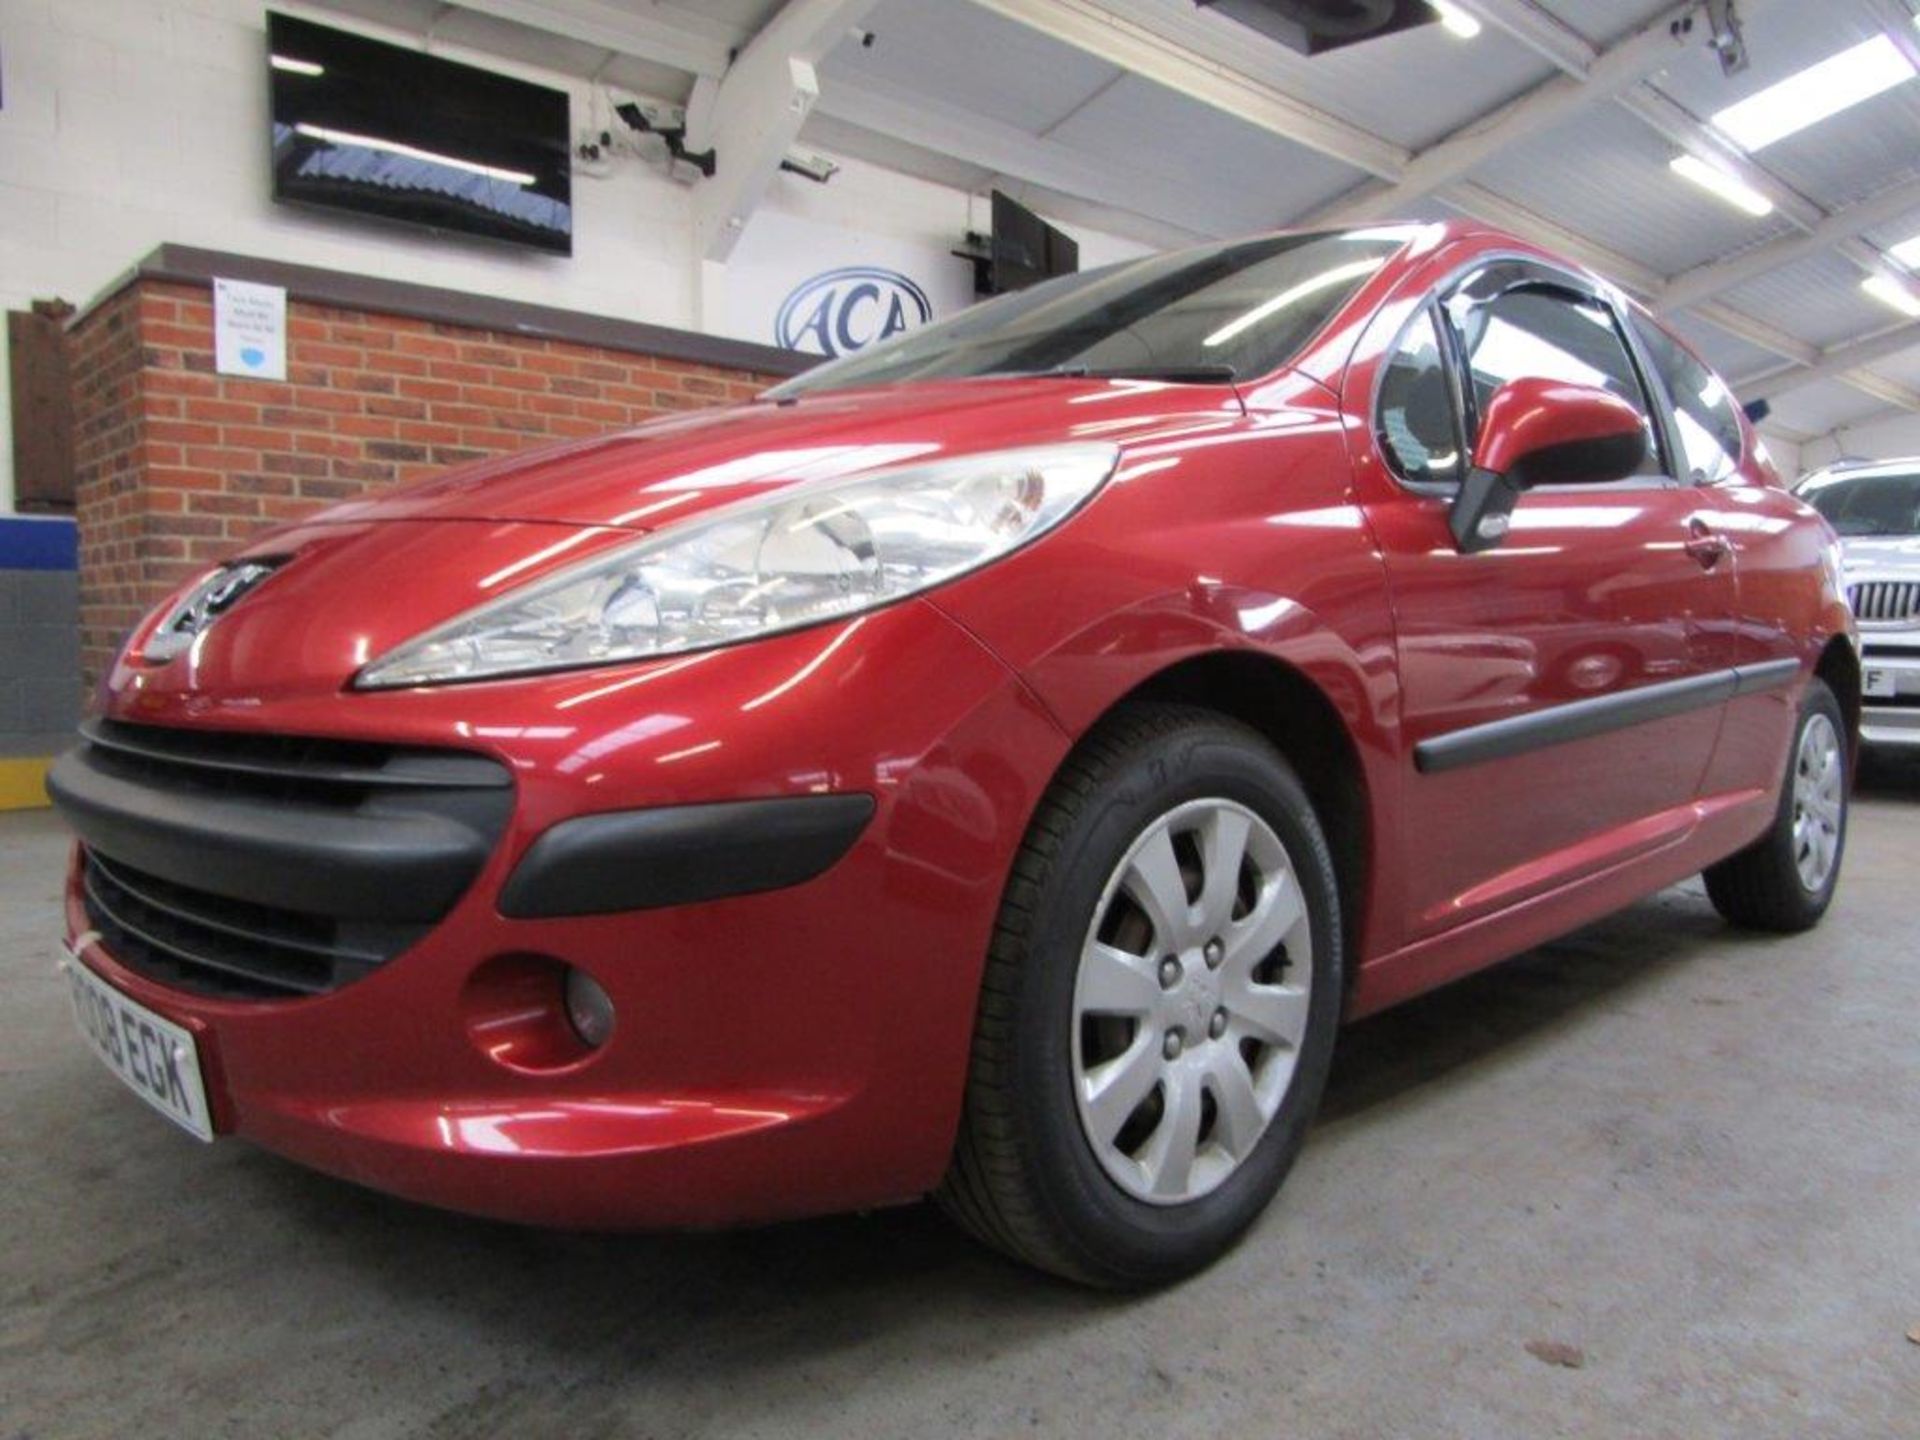 08 08 Peugeot 207 S - Image 19 of 24